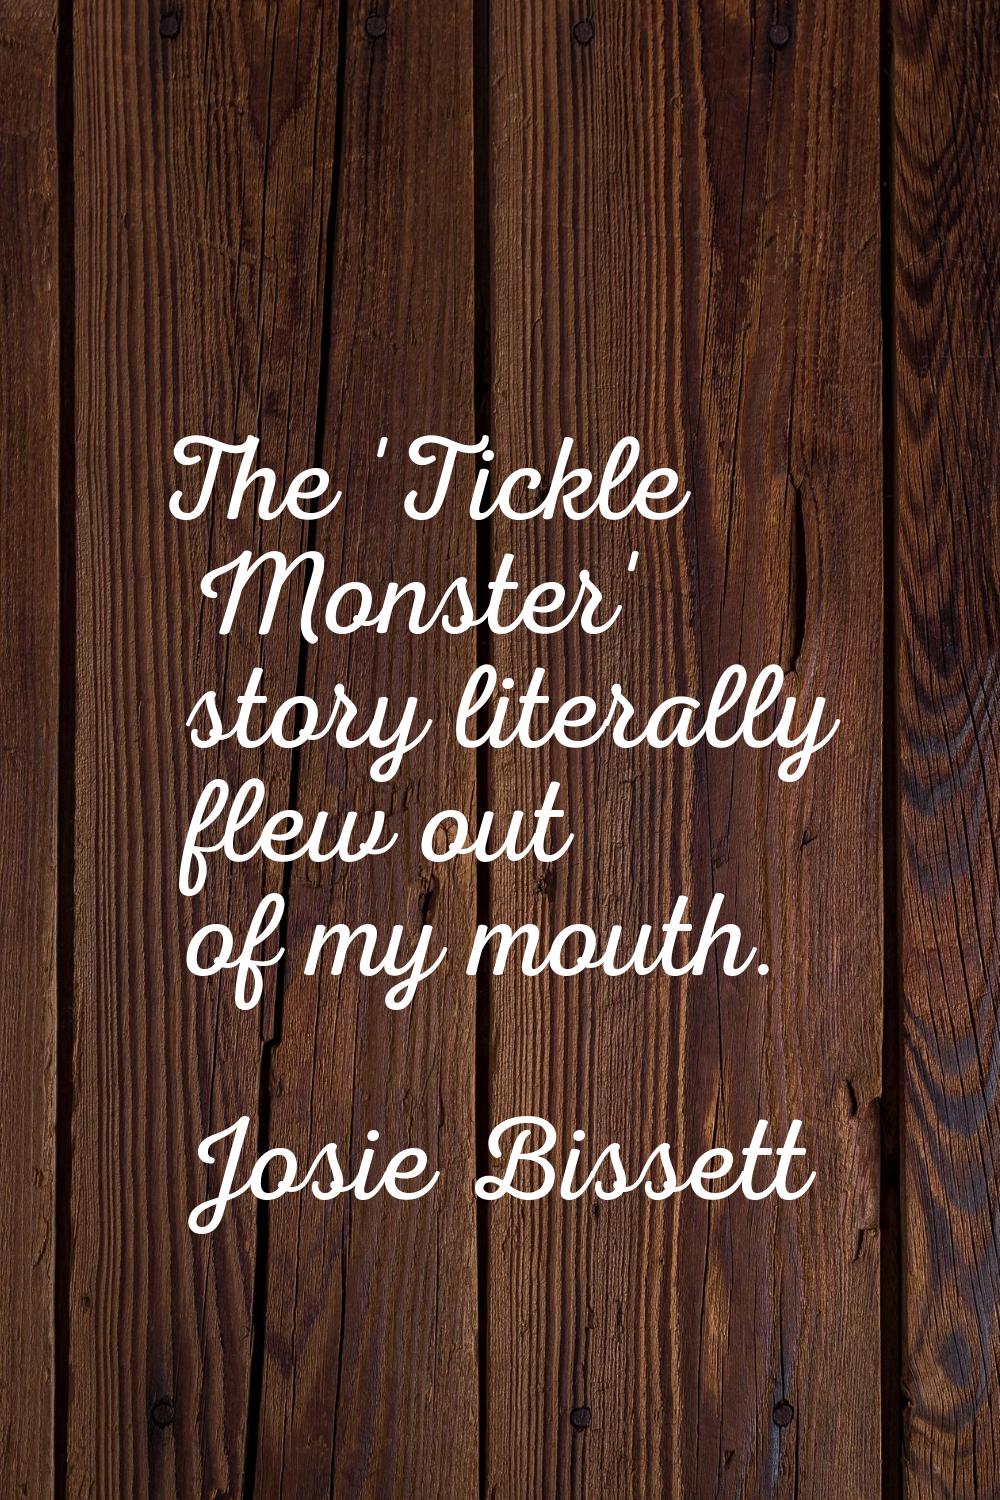 The 'Tickle Monster' story literally flew out of my mouth.